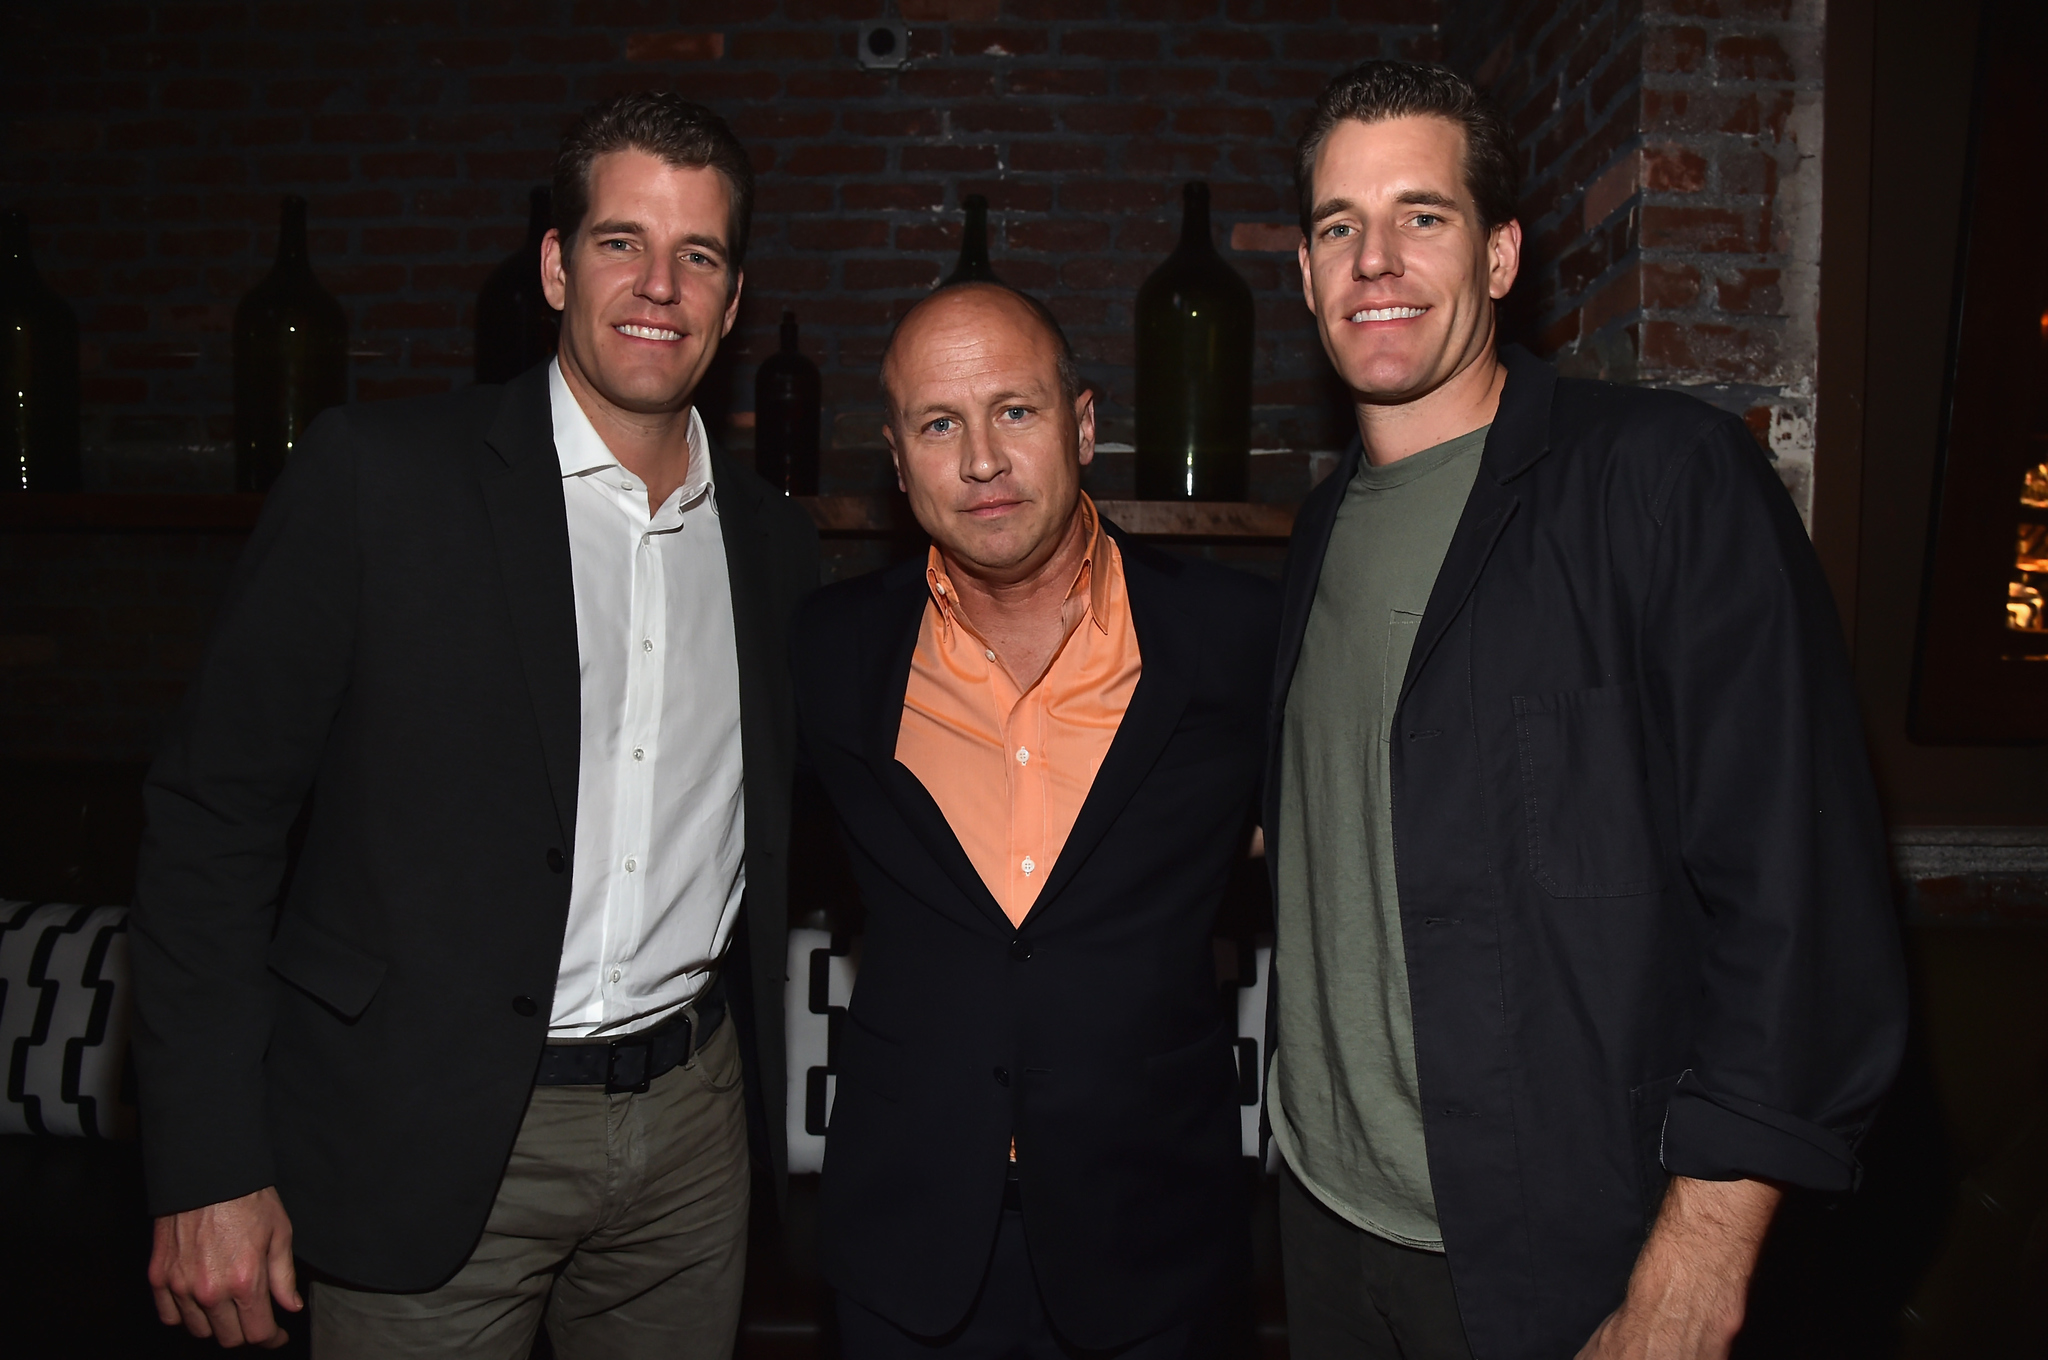 Mike Judge, Tyler Winklevoss and Cameron Winklevoss at event of Silicon Valley (2014)